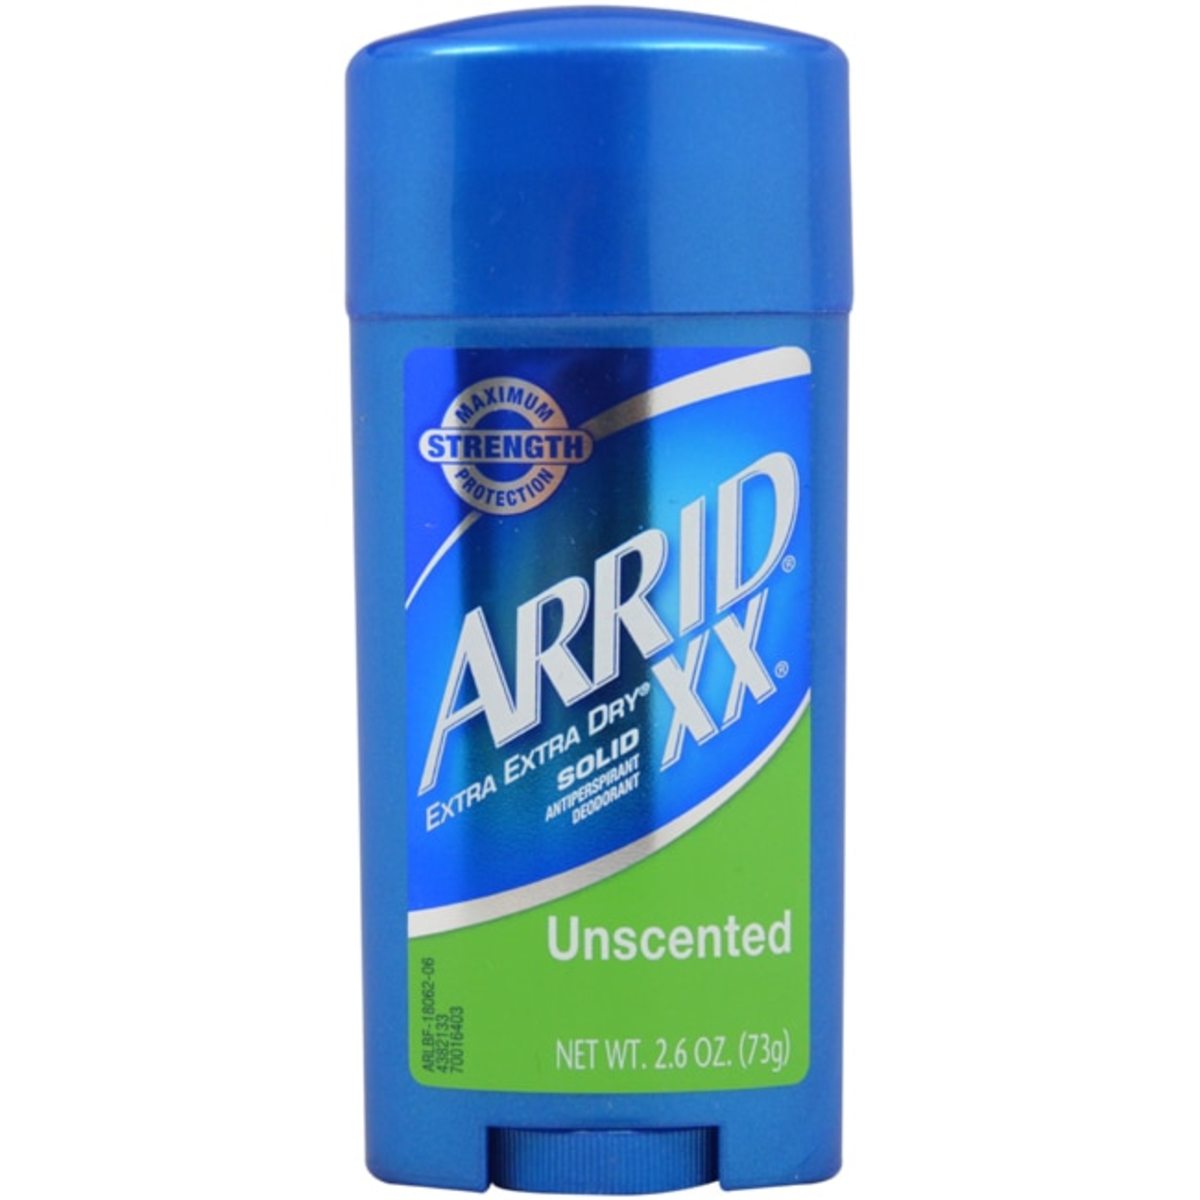 Extra Extra Dry in an unscented stick variety